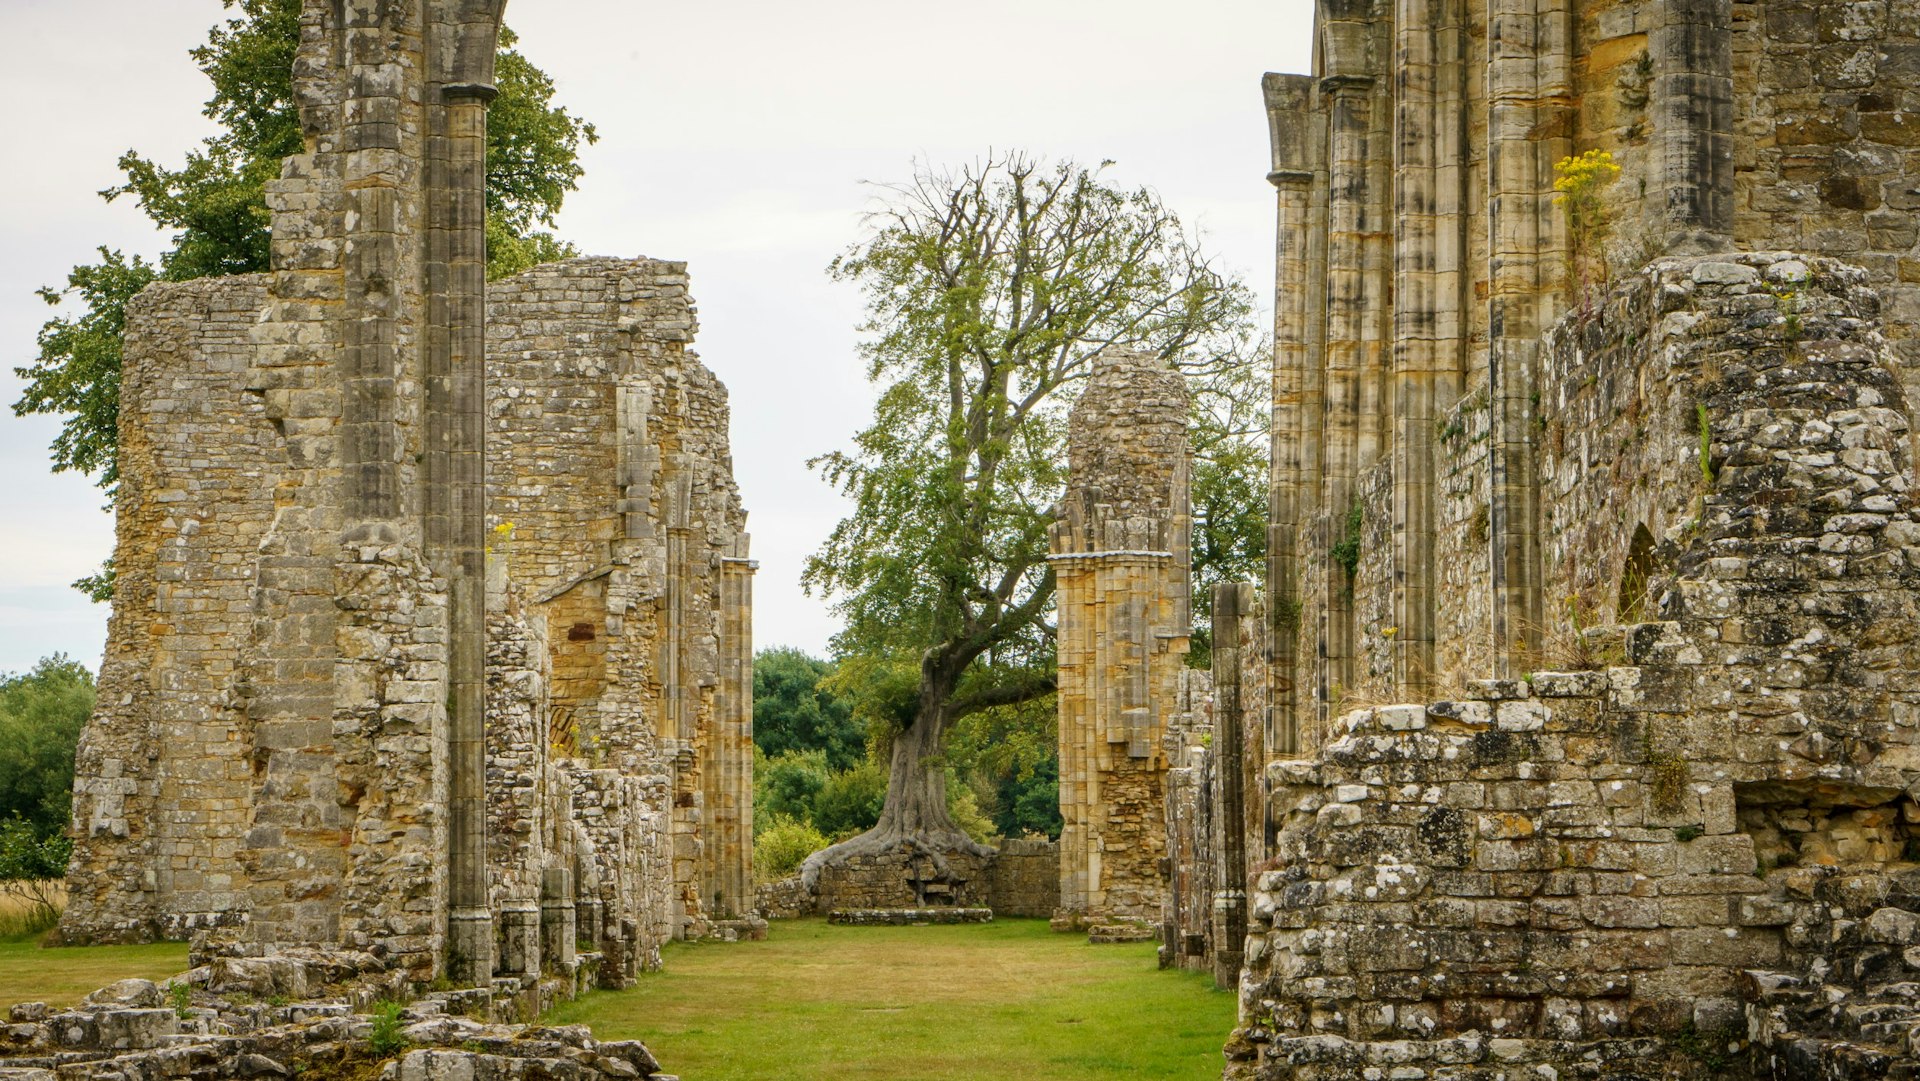 The Beech Tree grows out of the ruins at Bayham Abbey in England